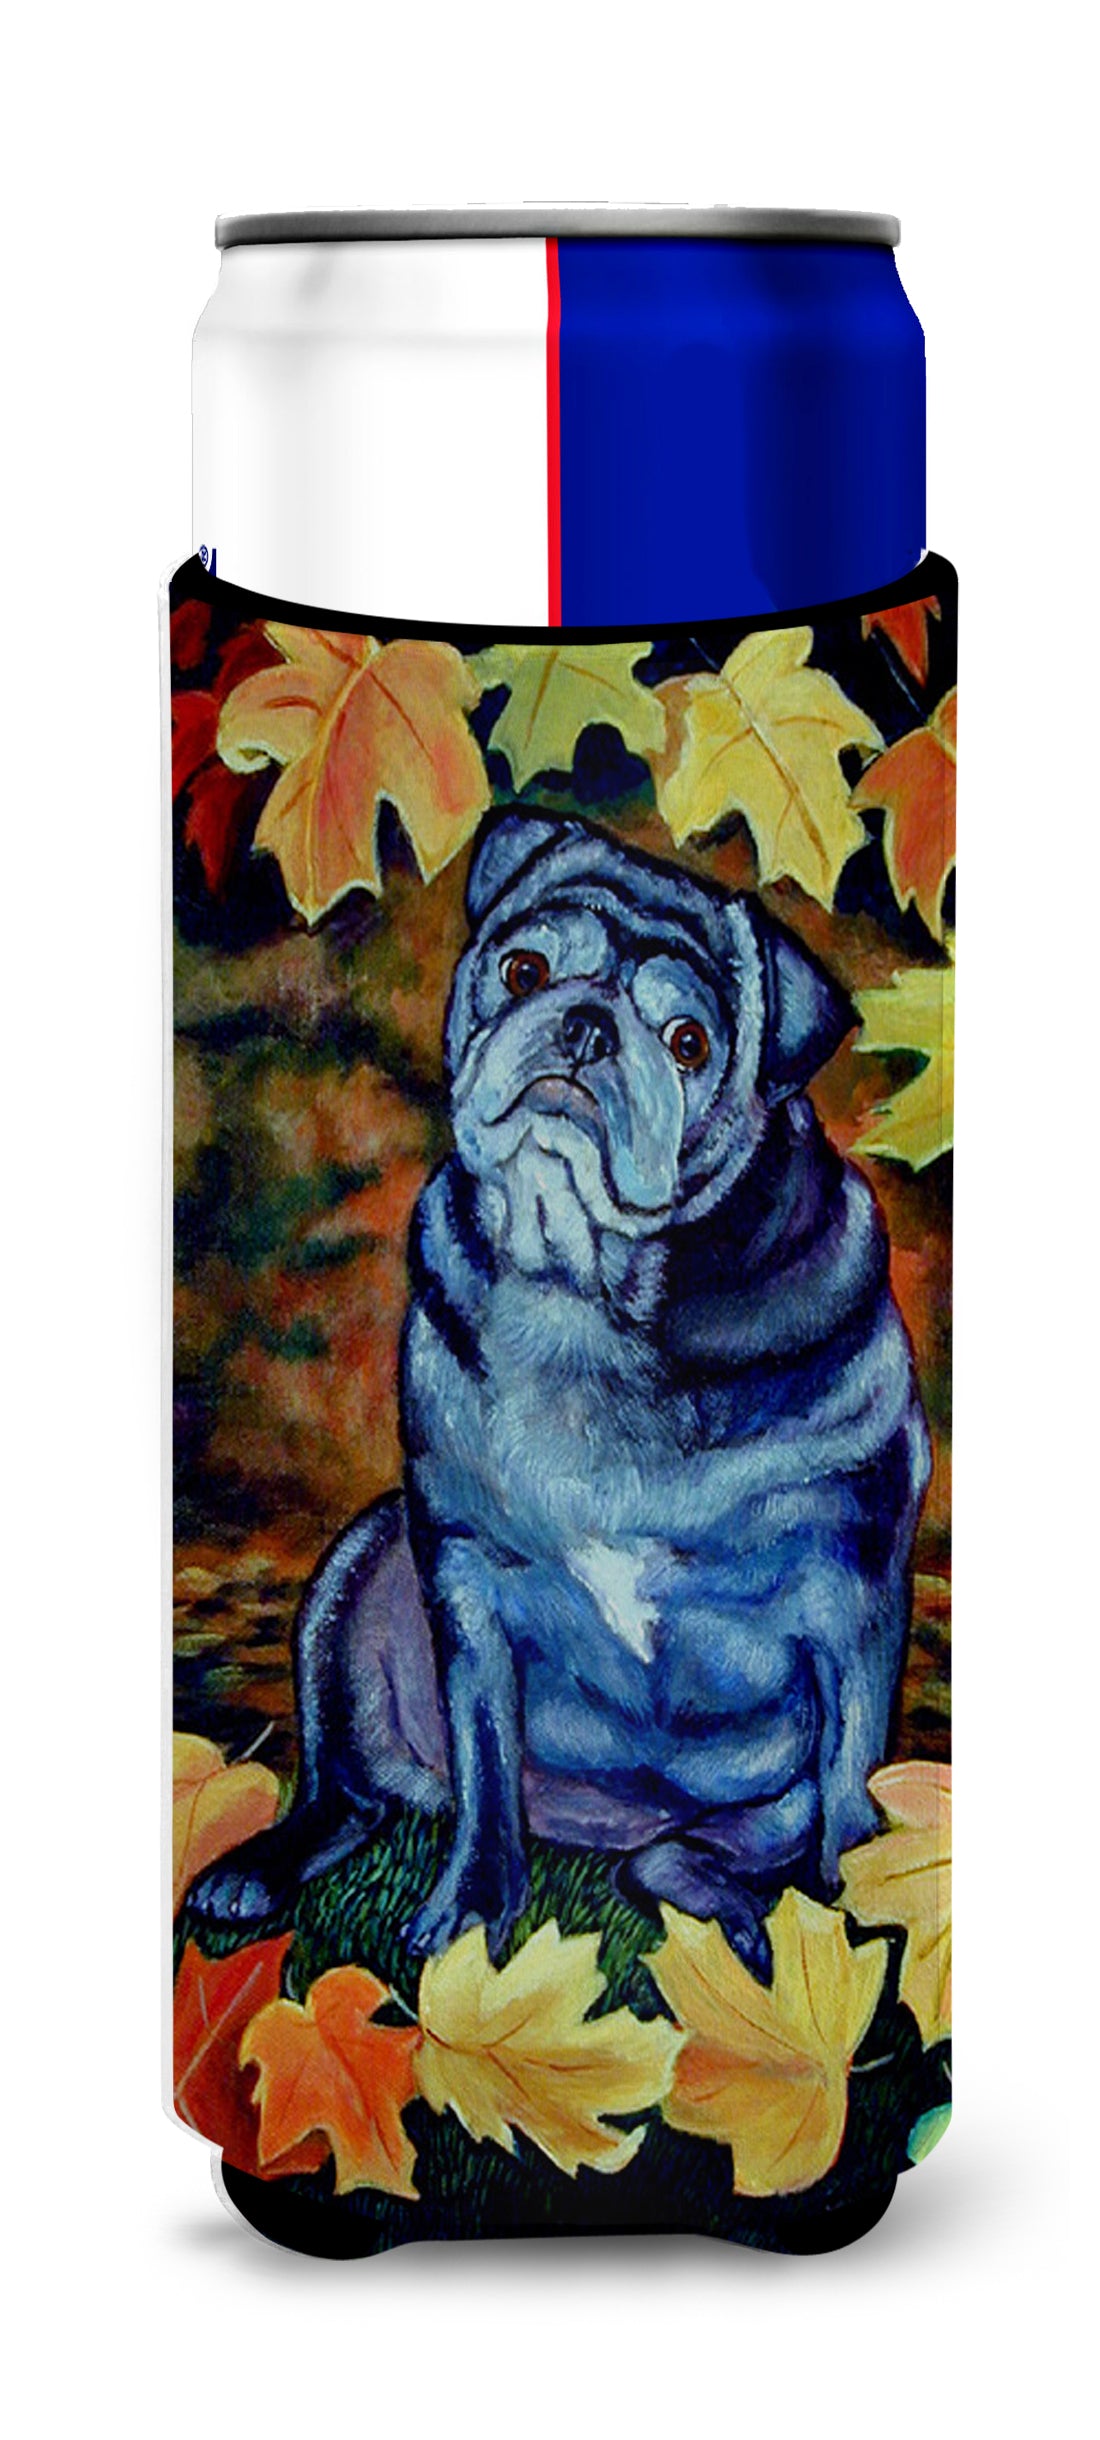 Old Black Pug in Fall Leaves Ultra Beverage Insulators for slim cans 7159MUK.